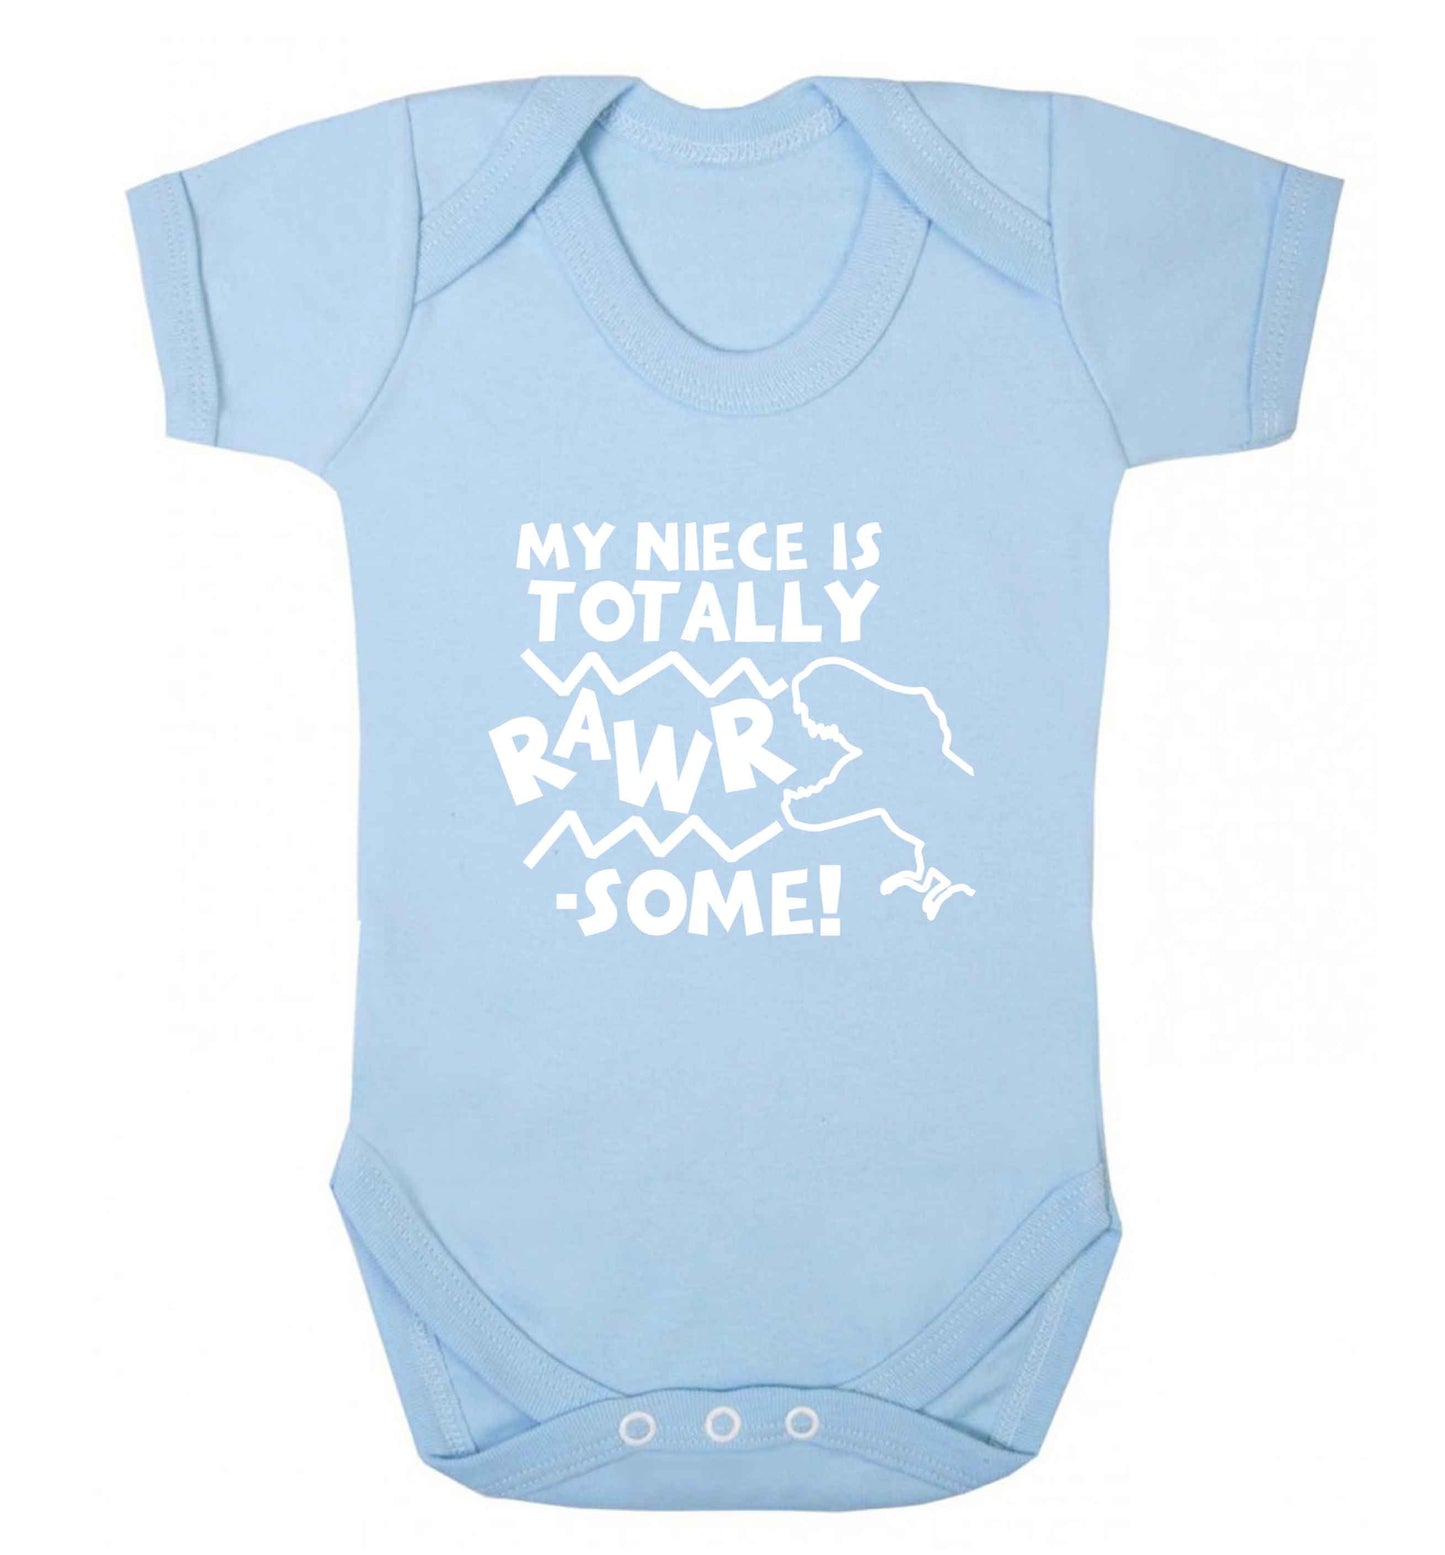 My niece is totally rawrsome baby vest pale blue 18-24 months